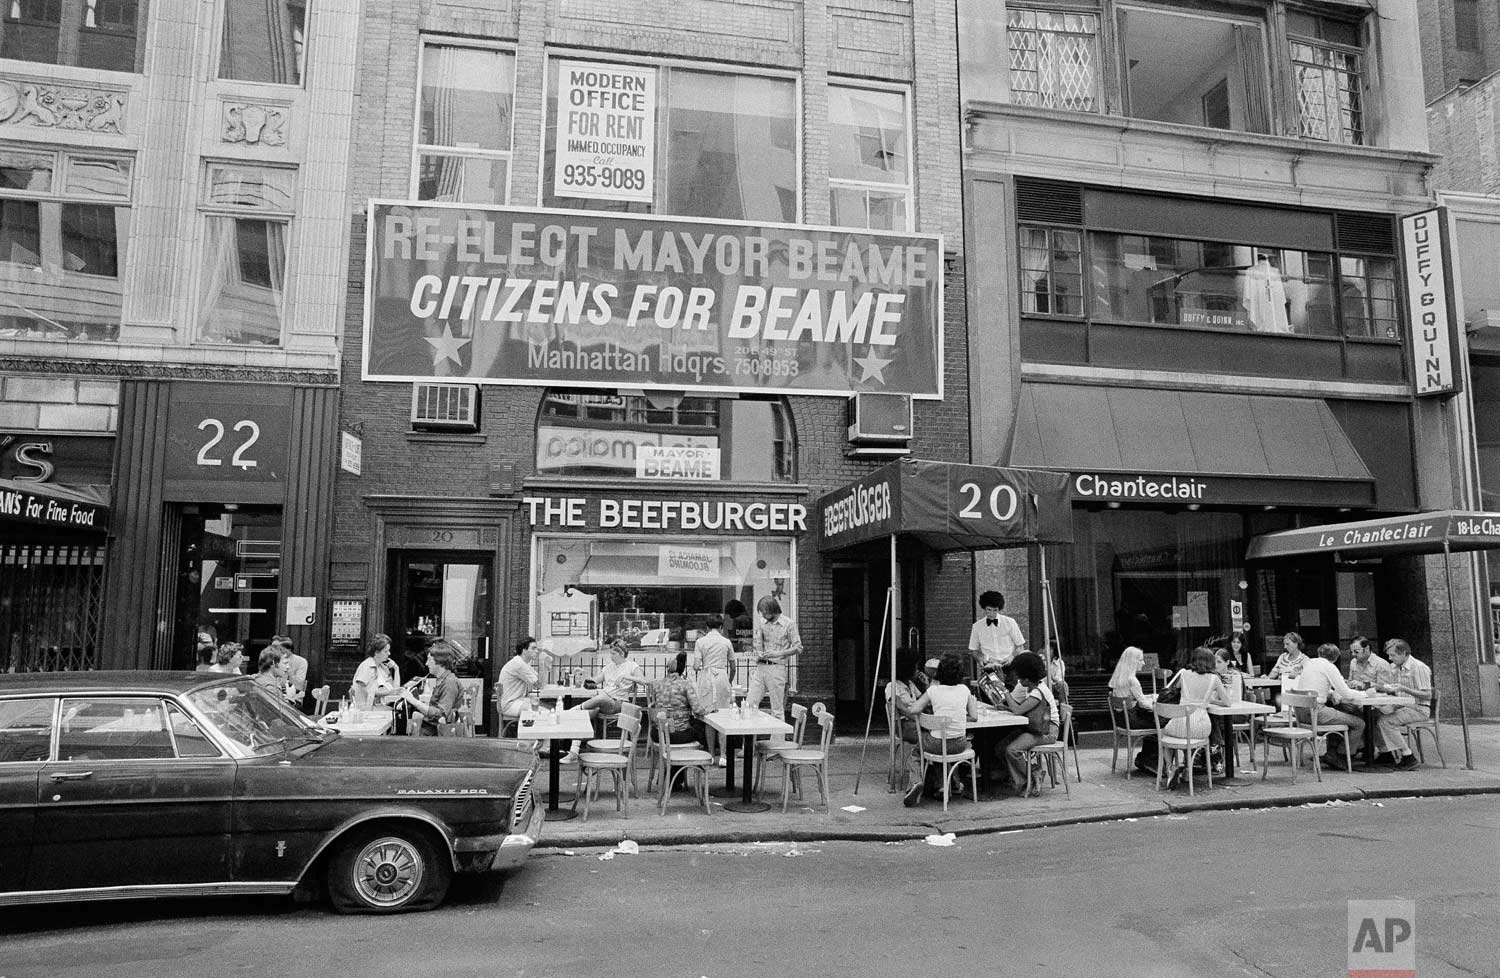  A midtown, Manhattan restaurant moved its tables and customers to the sidewalk, July 14, 1977, after a massive power failure in New York City cut off electricity inside. (AP Photo/Marty Lederhandler) 